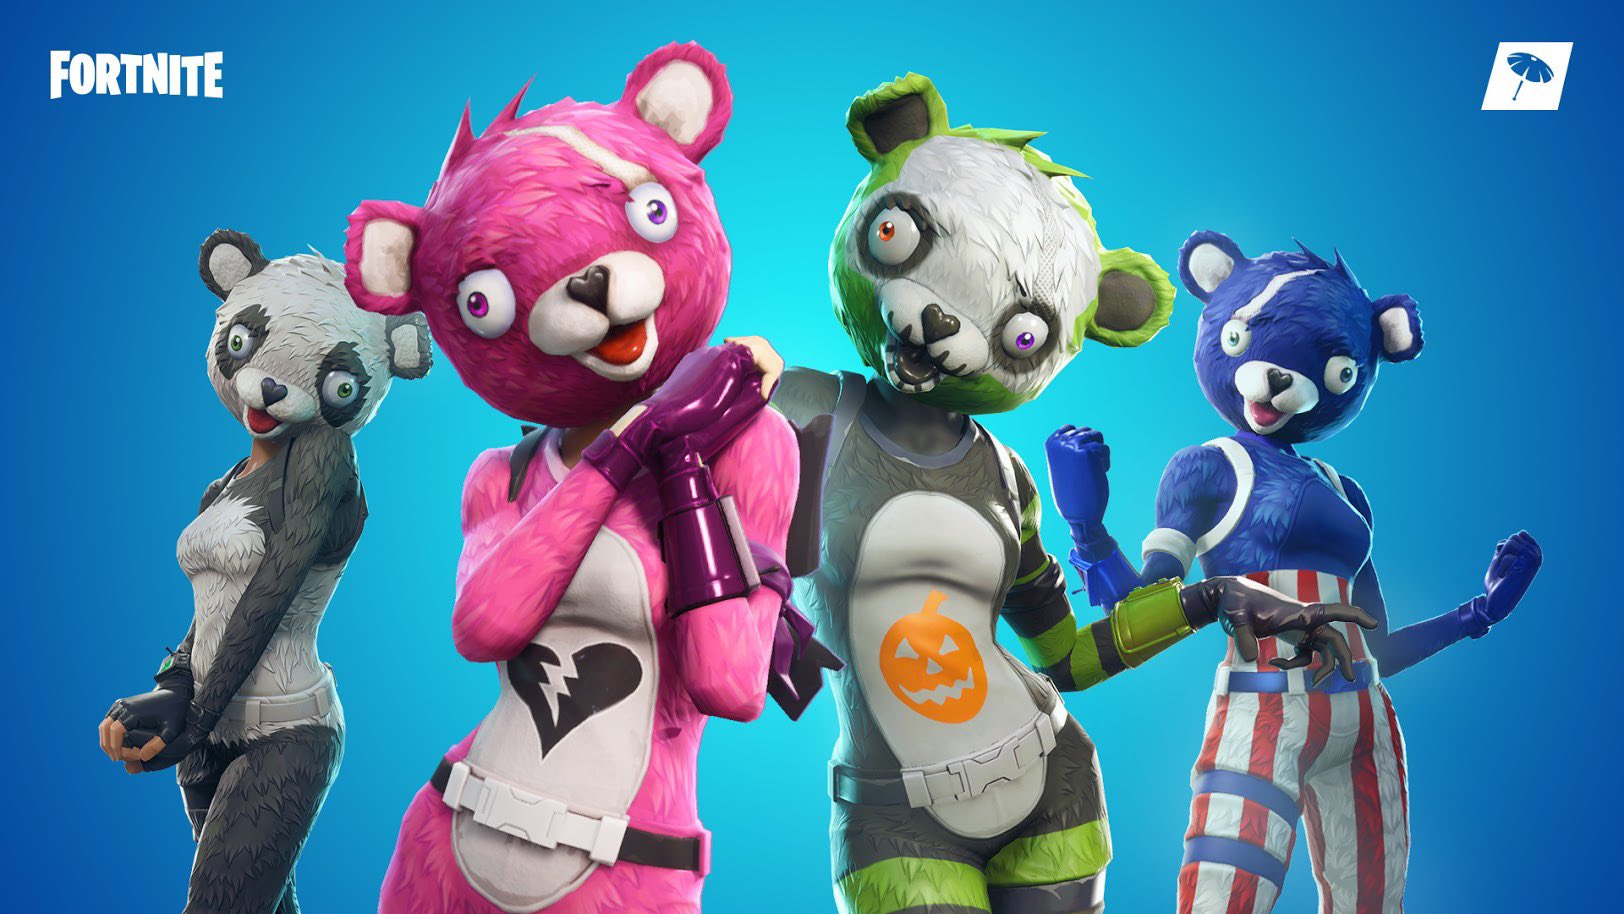 Games/Great Leader/Collection/Adorable/Fortnite Panda Team Leader P.A.N.D.A Funk 